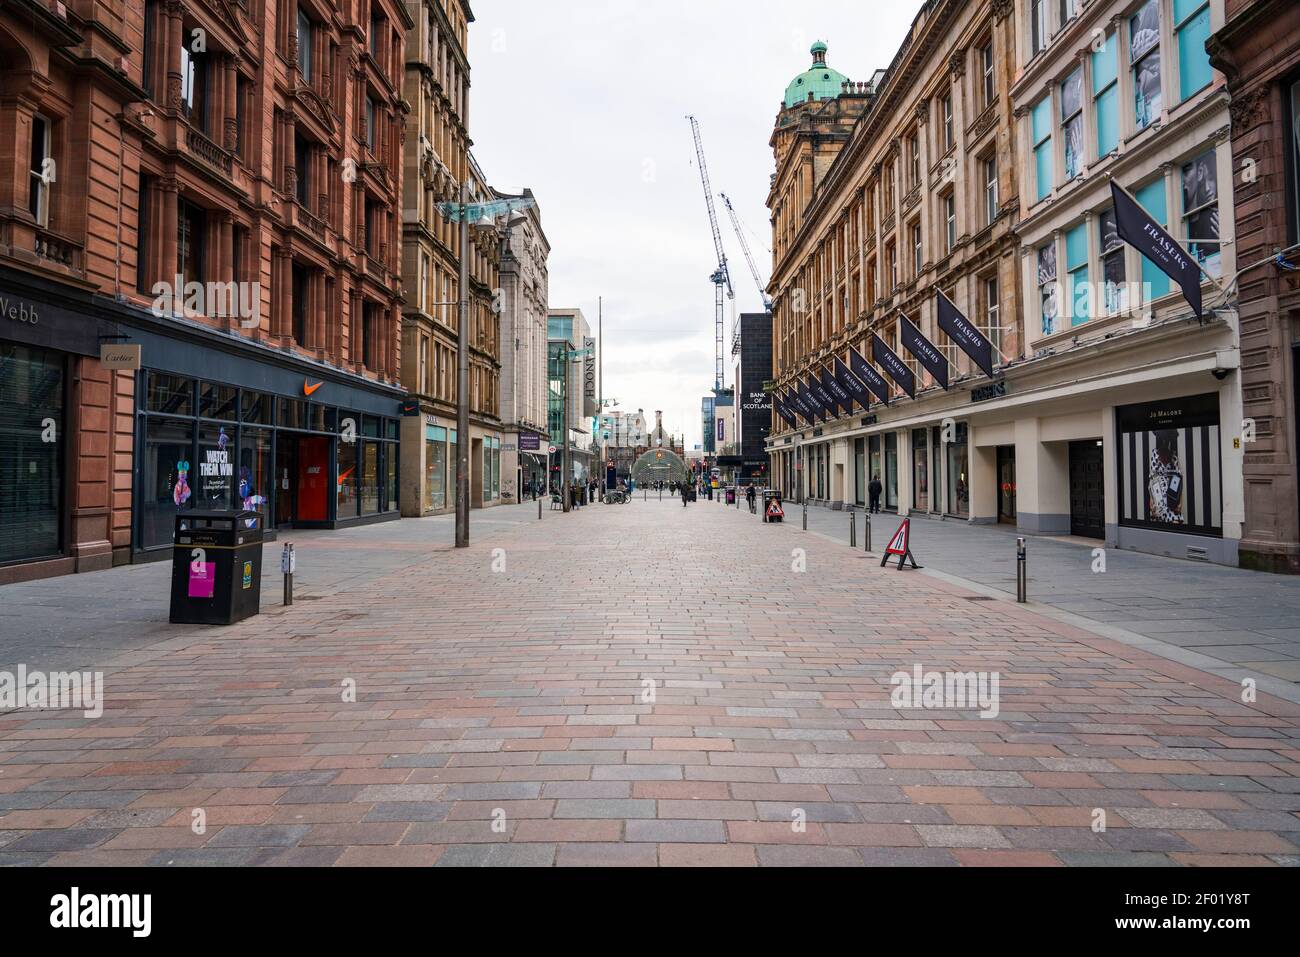 Glasgow, Scotland, UK. 6 Mar 2021. With Scotland remaining under national lockdown during the covid-19 pandemic Glasgow city centre remains a virtual ghost town with few people in the city centre and almost all shops and businesses still closed.  Pic; Buchanan Street pedestrian shopping street is almost empty people and all shops are shuttered.  Iain Masterton/Alamy Live News Stock Photo